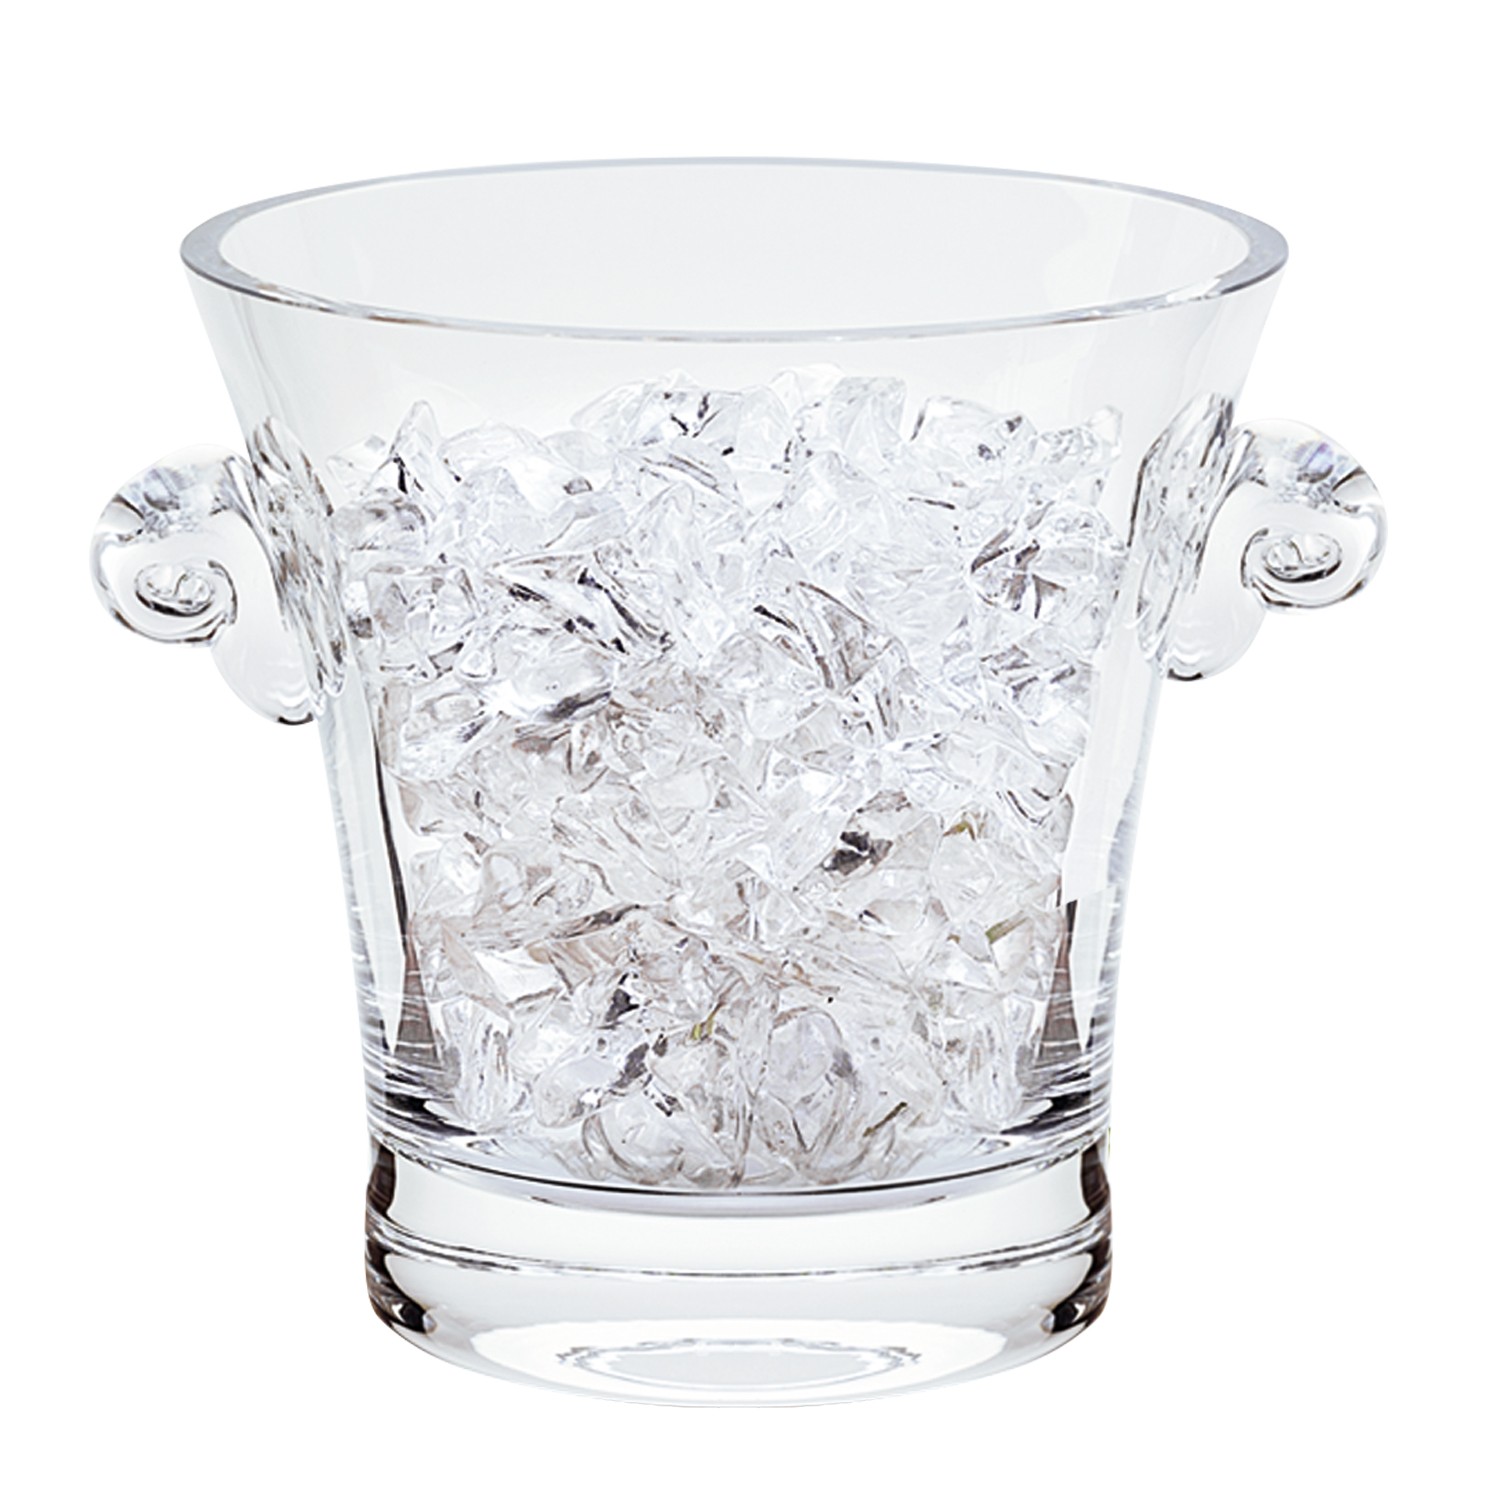 7" Mouth Blown Crystal Ice Bucket